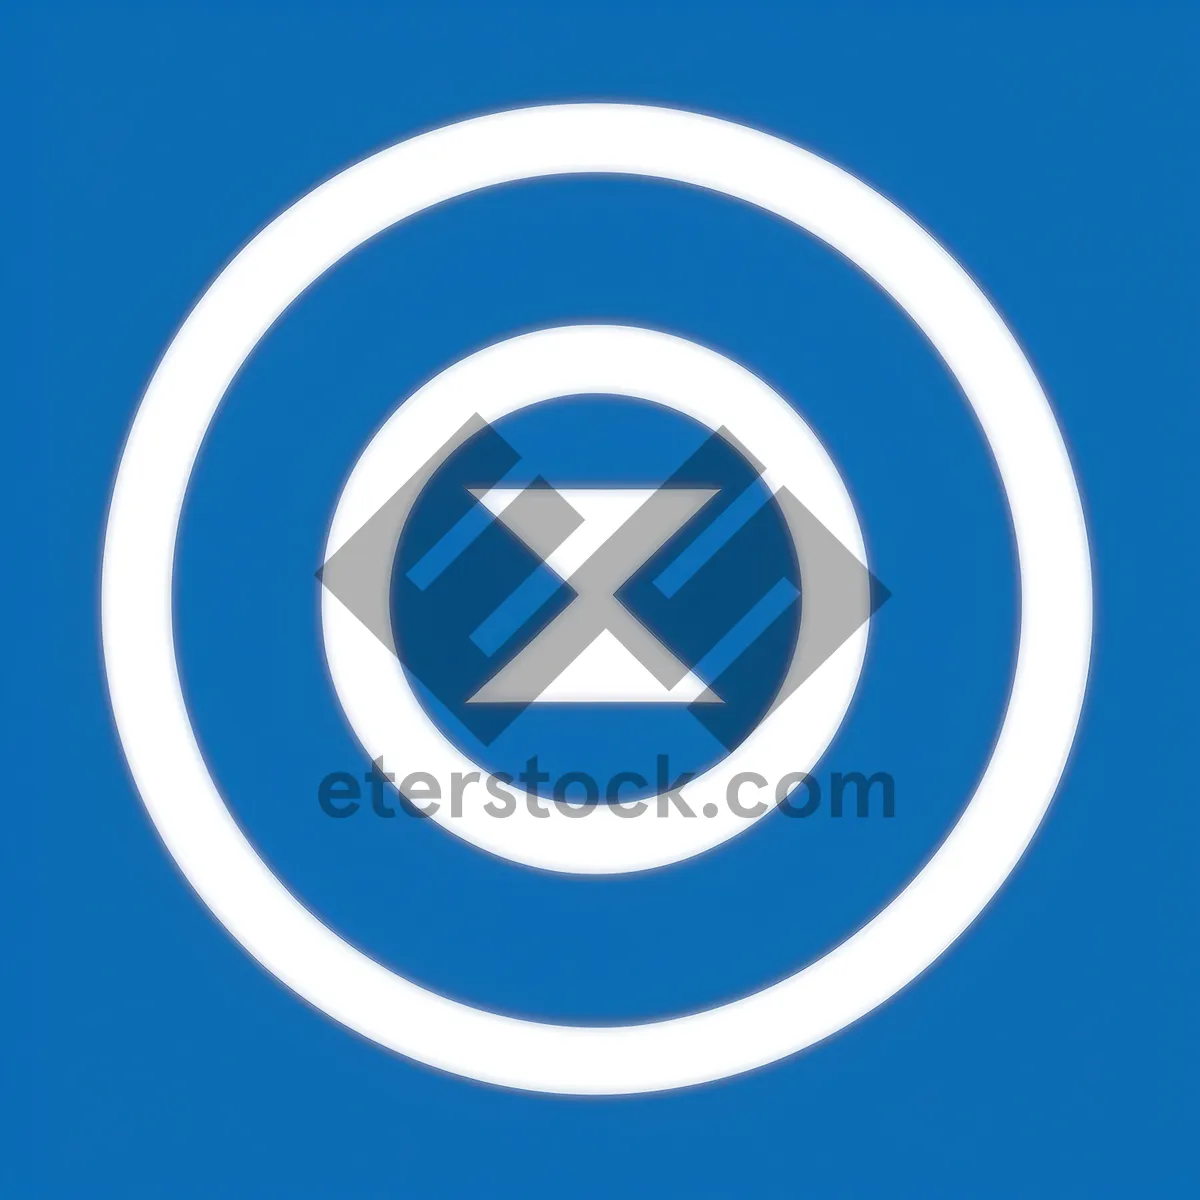 Picture of Glossy Web Button Set - Circular Business Icons